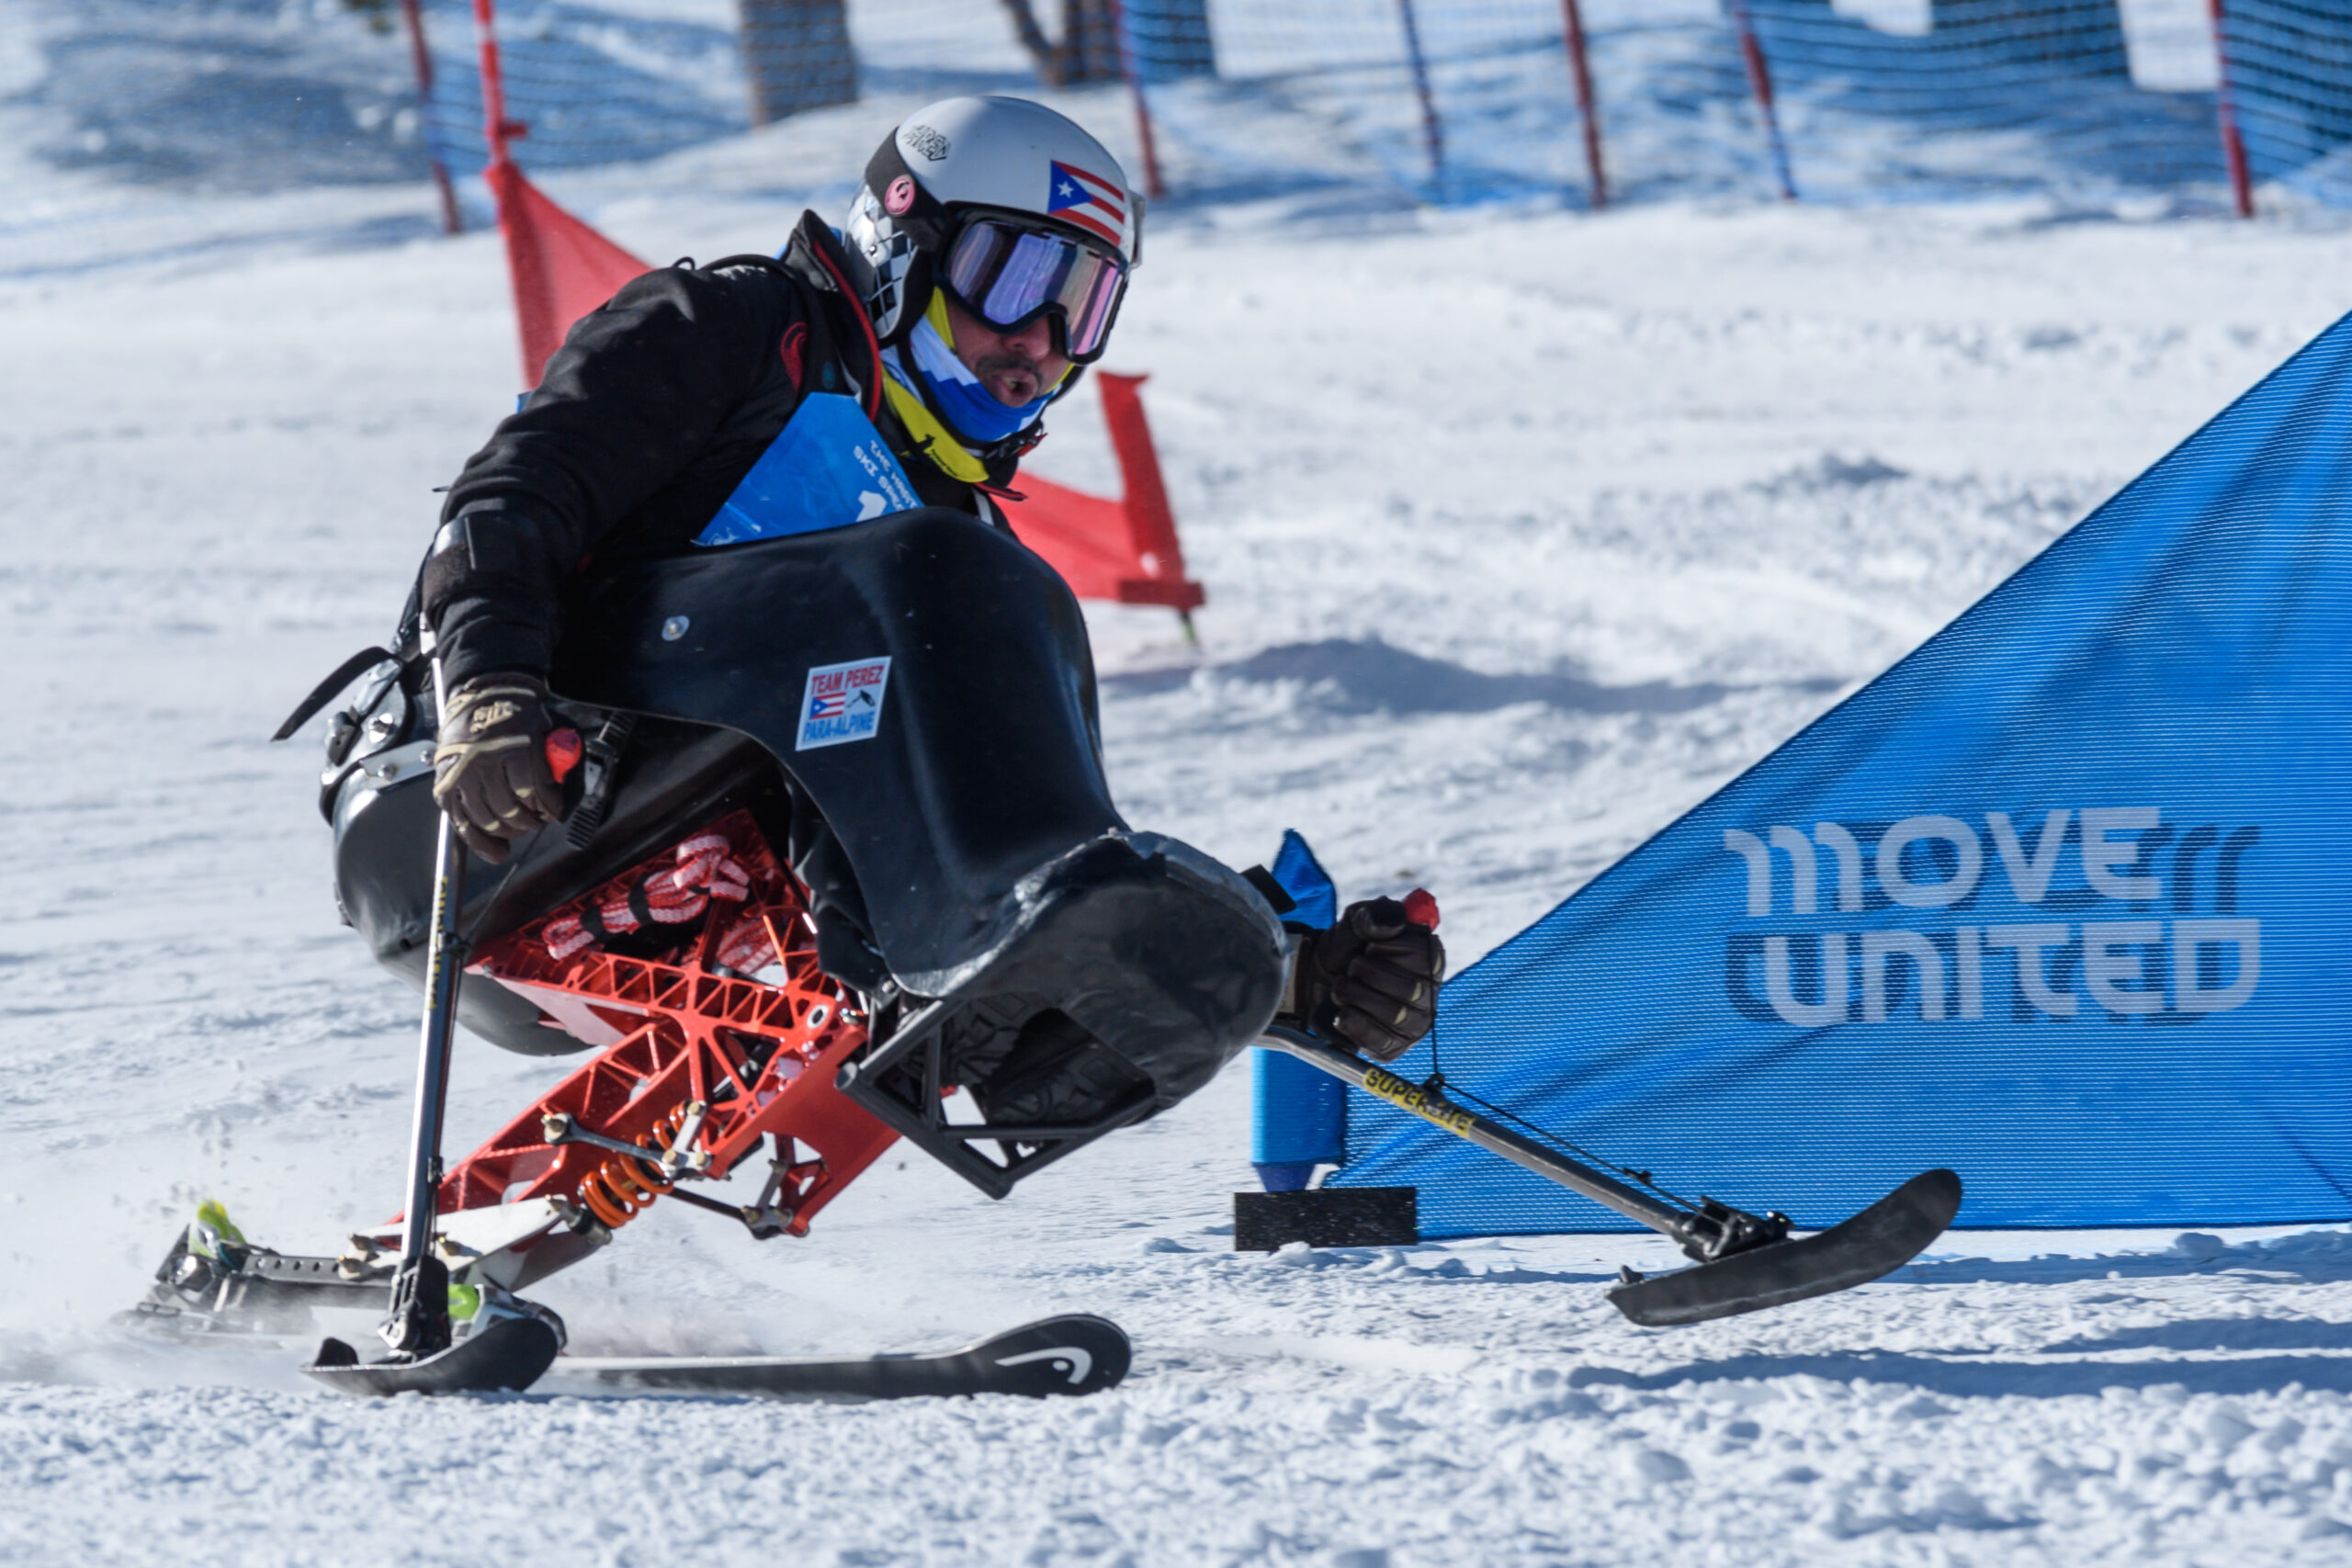 An adaptive skier going down a ski slope